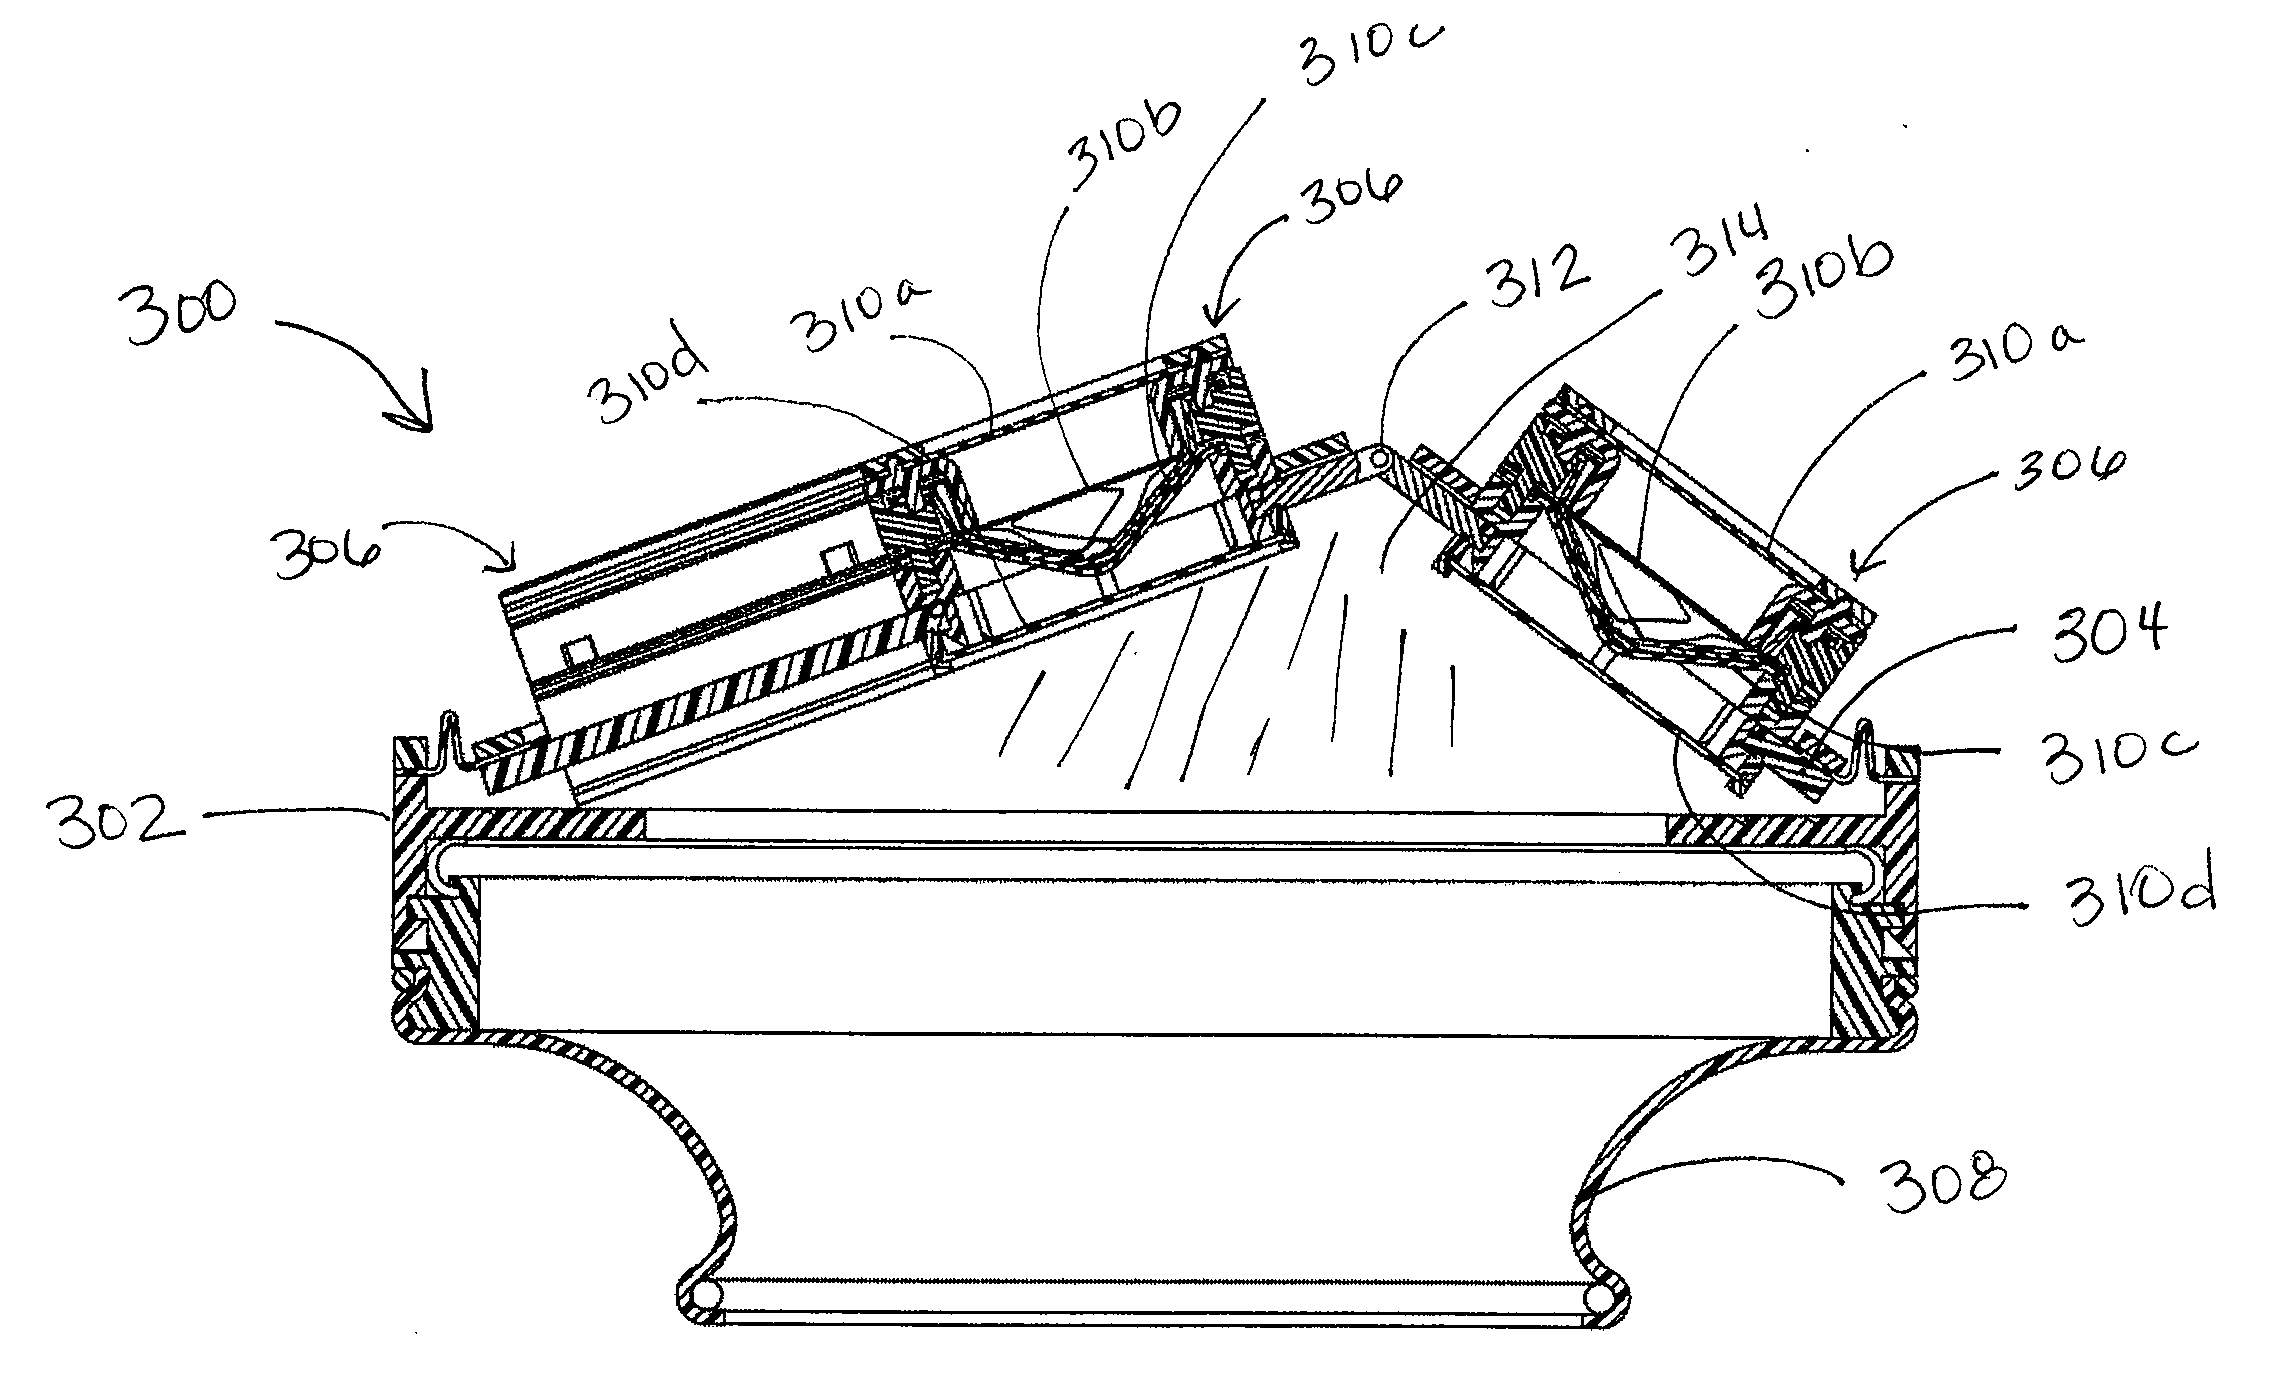 Surgical Access Device with One Time Seal